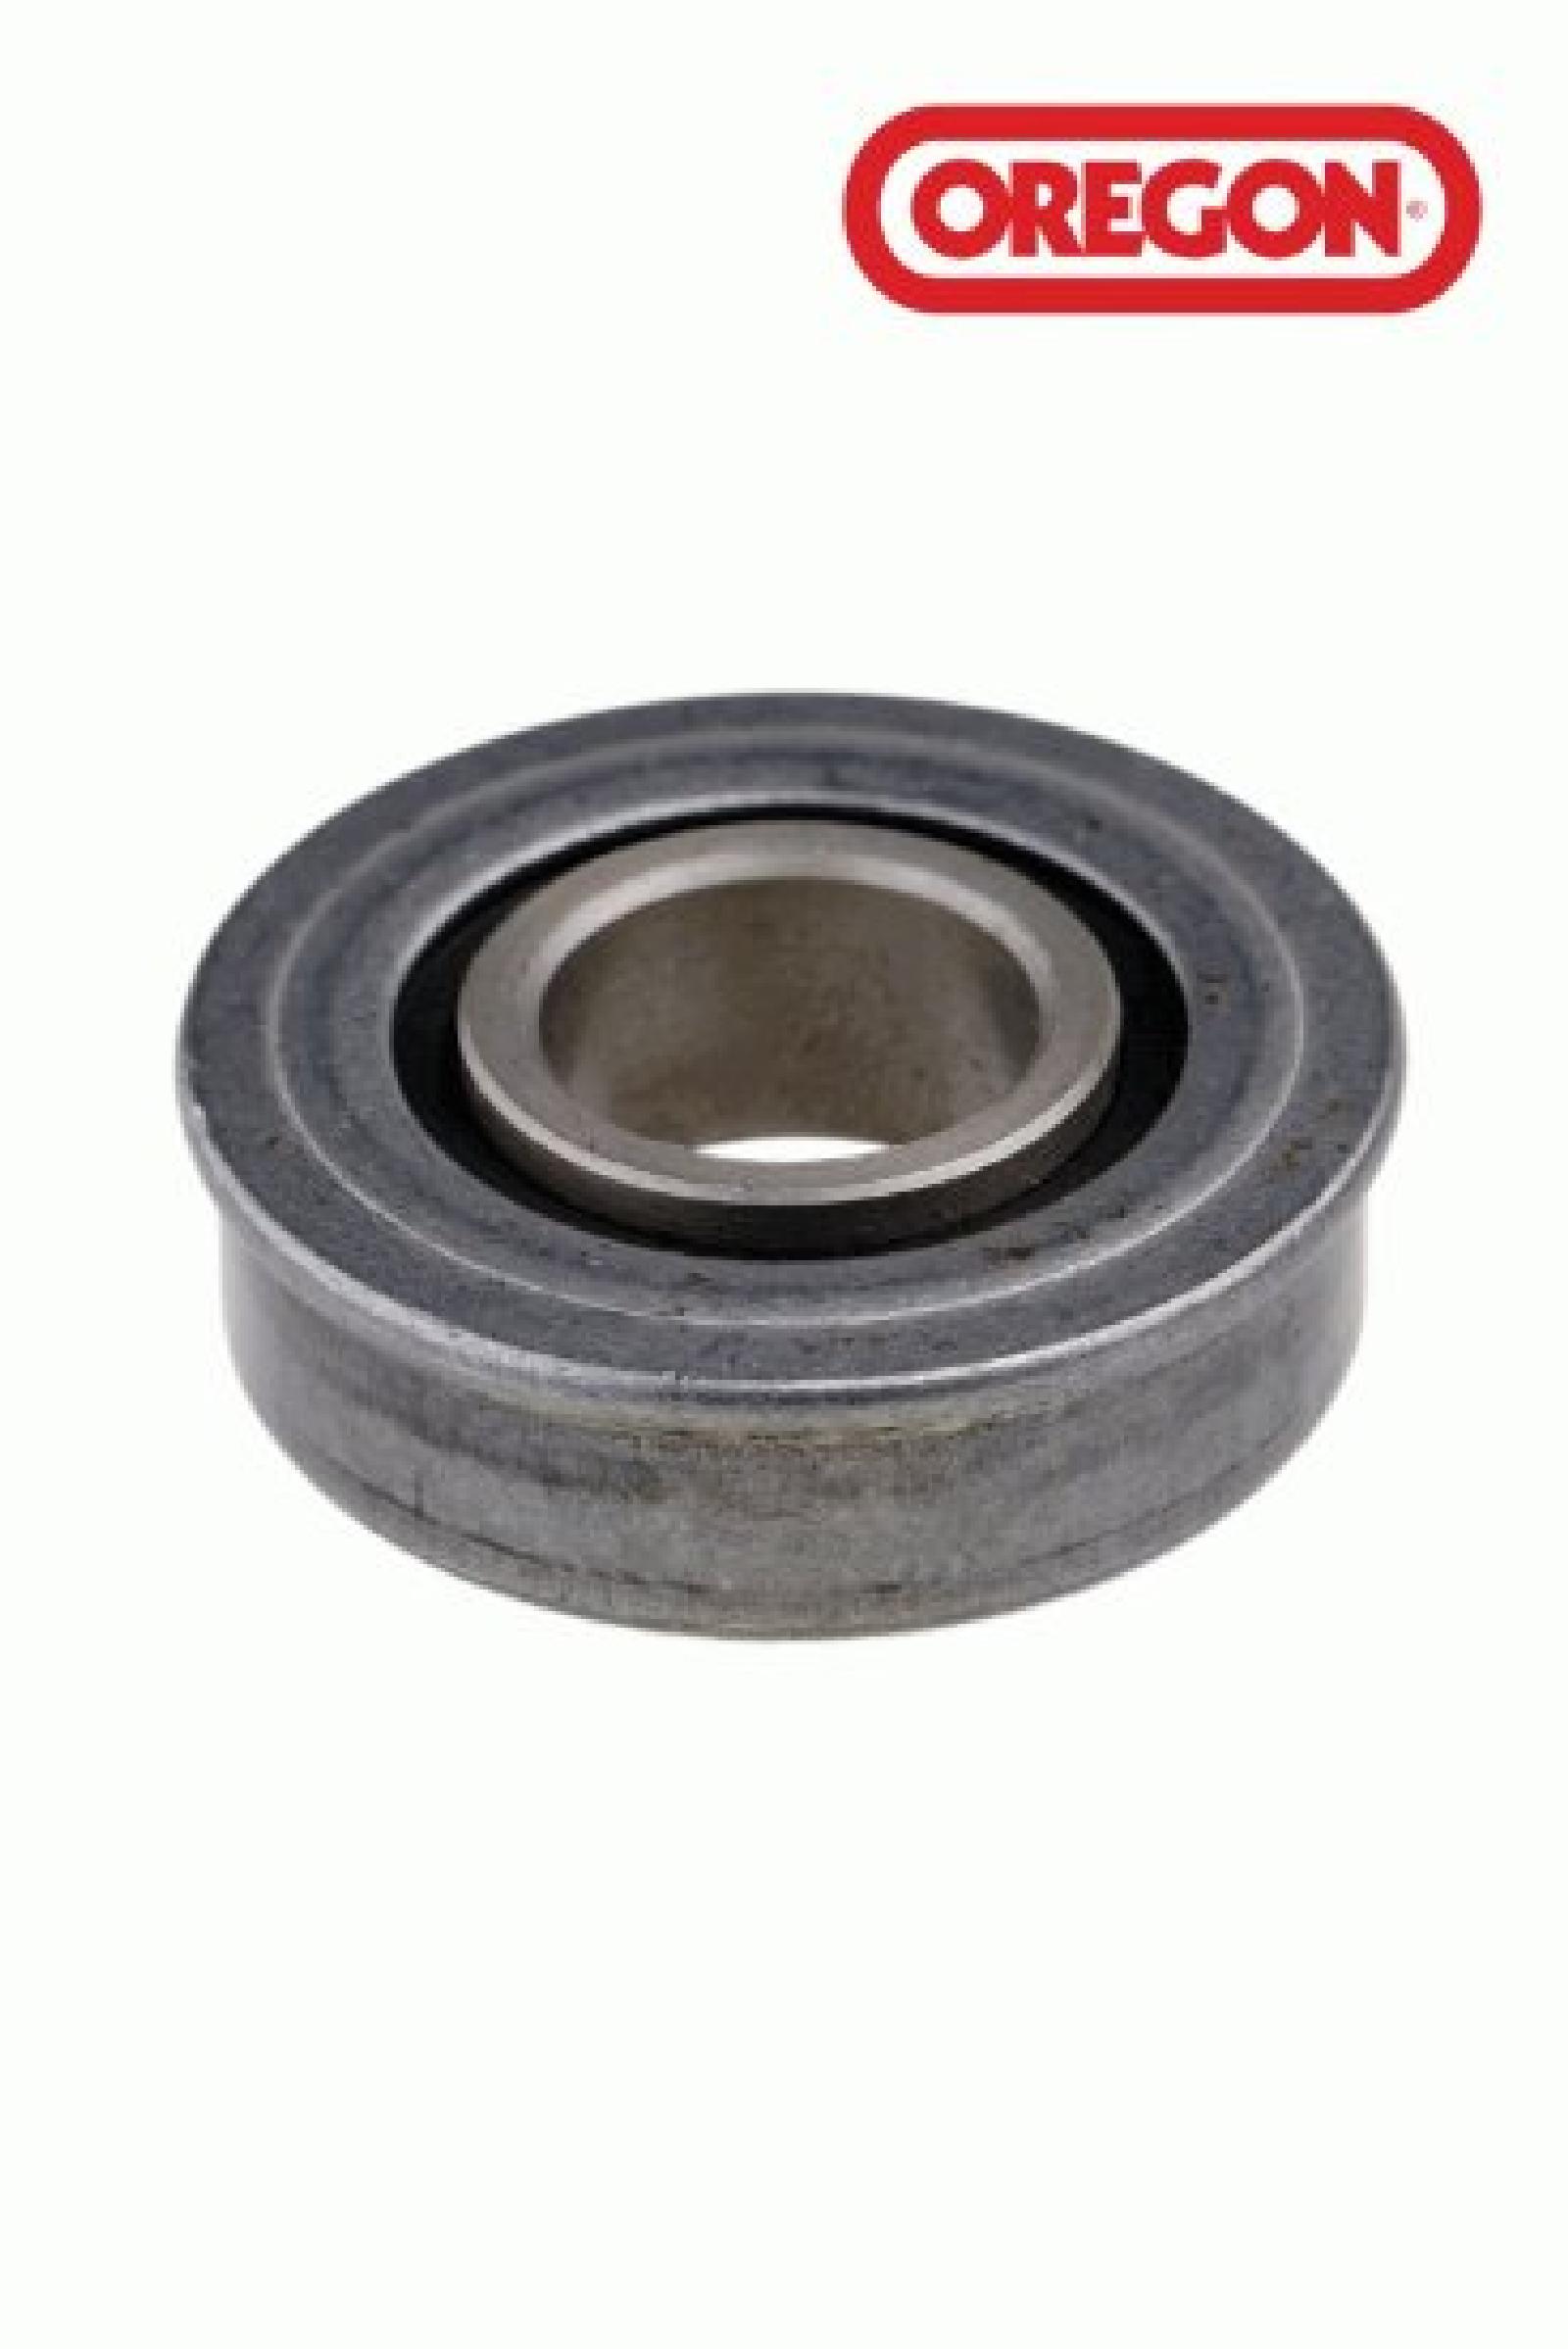 BEARING, RLR 3/4IN X 1/2I part# 45-064 by Oregon